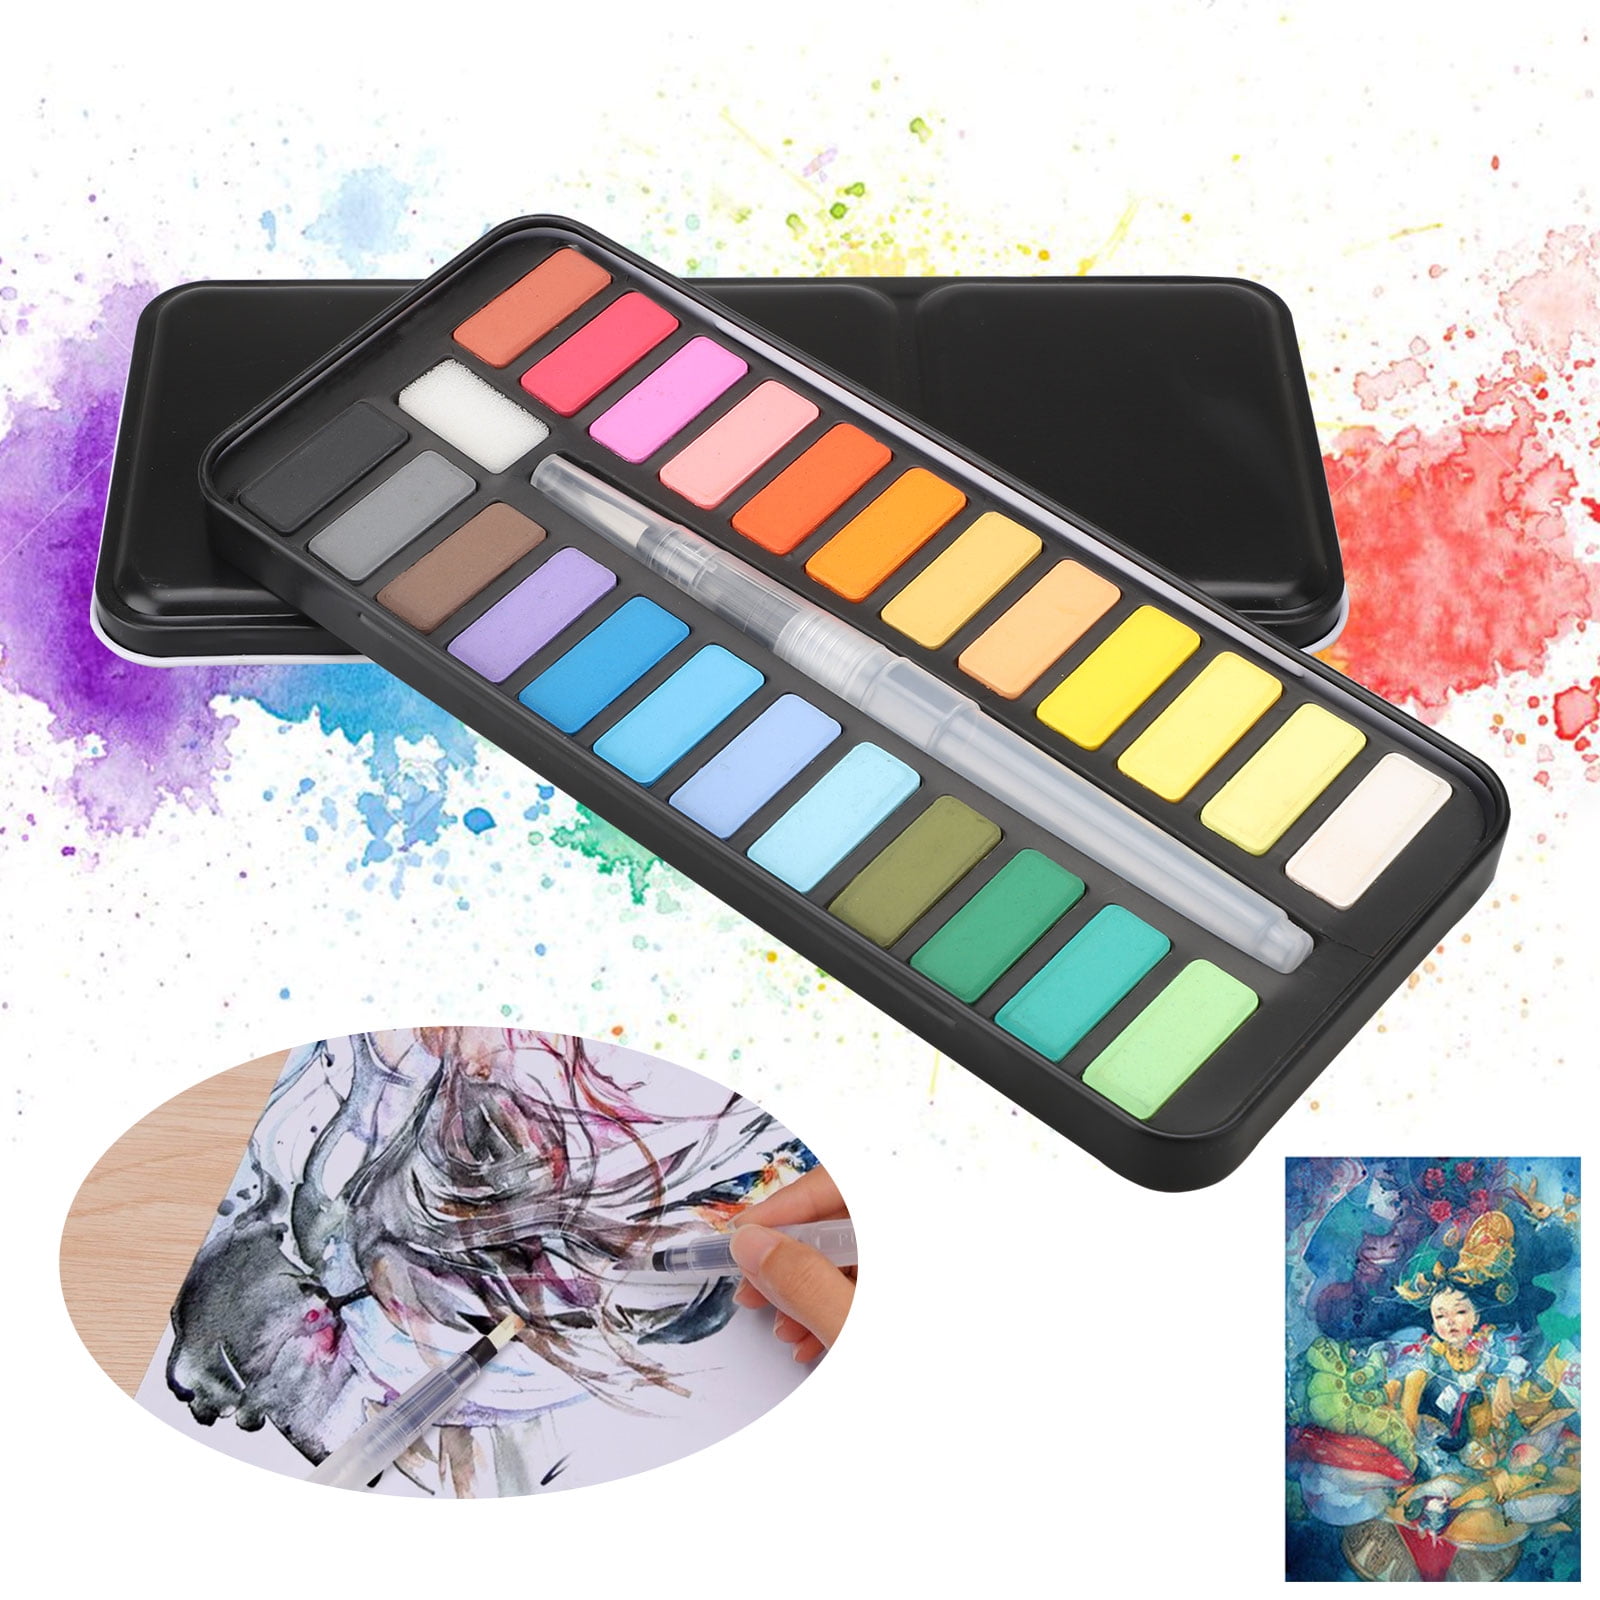  Watercolor Paint Set - 24 Vivid Colors Watercolor Set For Kids  And Adults,Lightweight & Portable Water Paint,Art Supplies Watercolor Blue  Metal Box Paintbrush Included : Arts, Crafts & Sewing